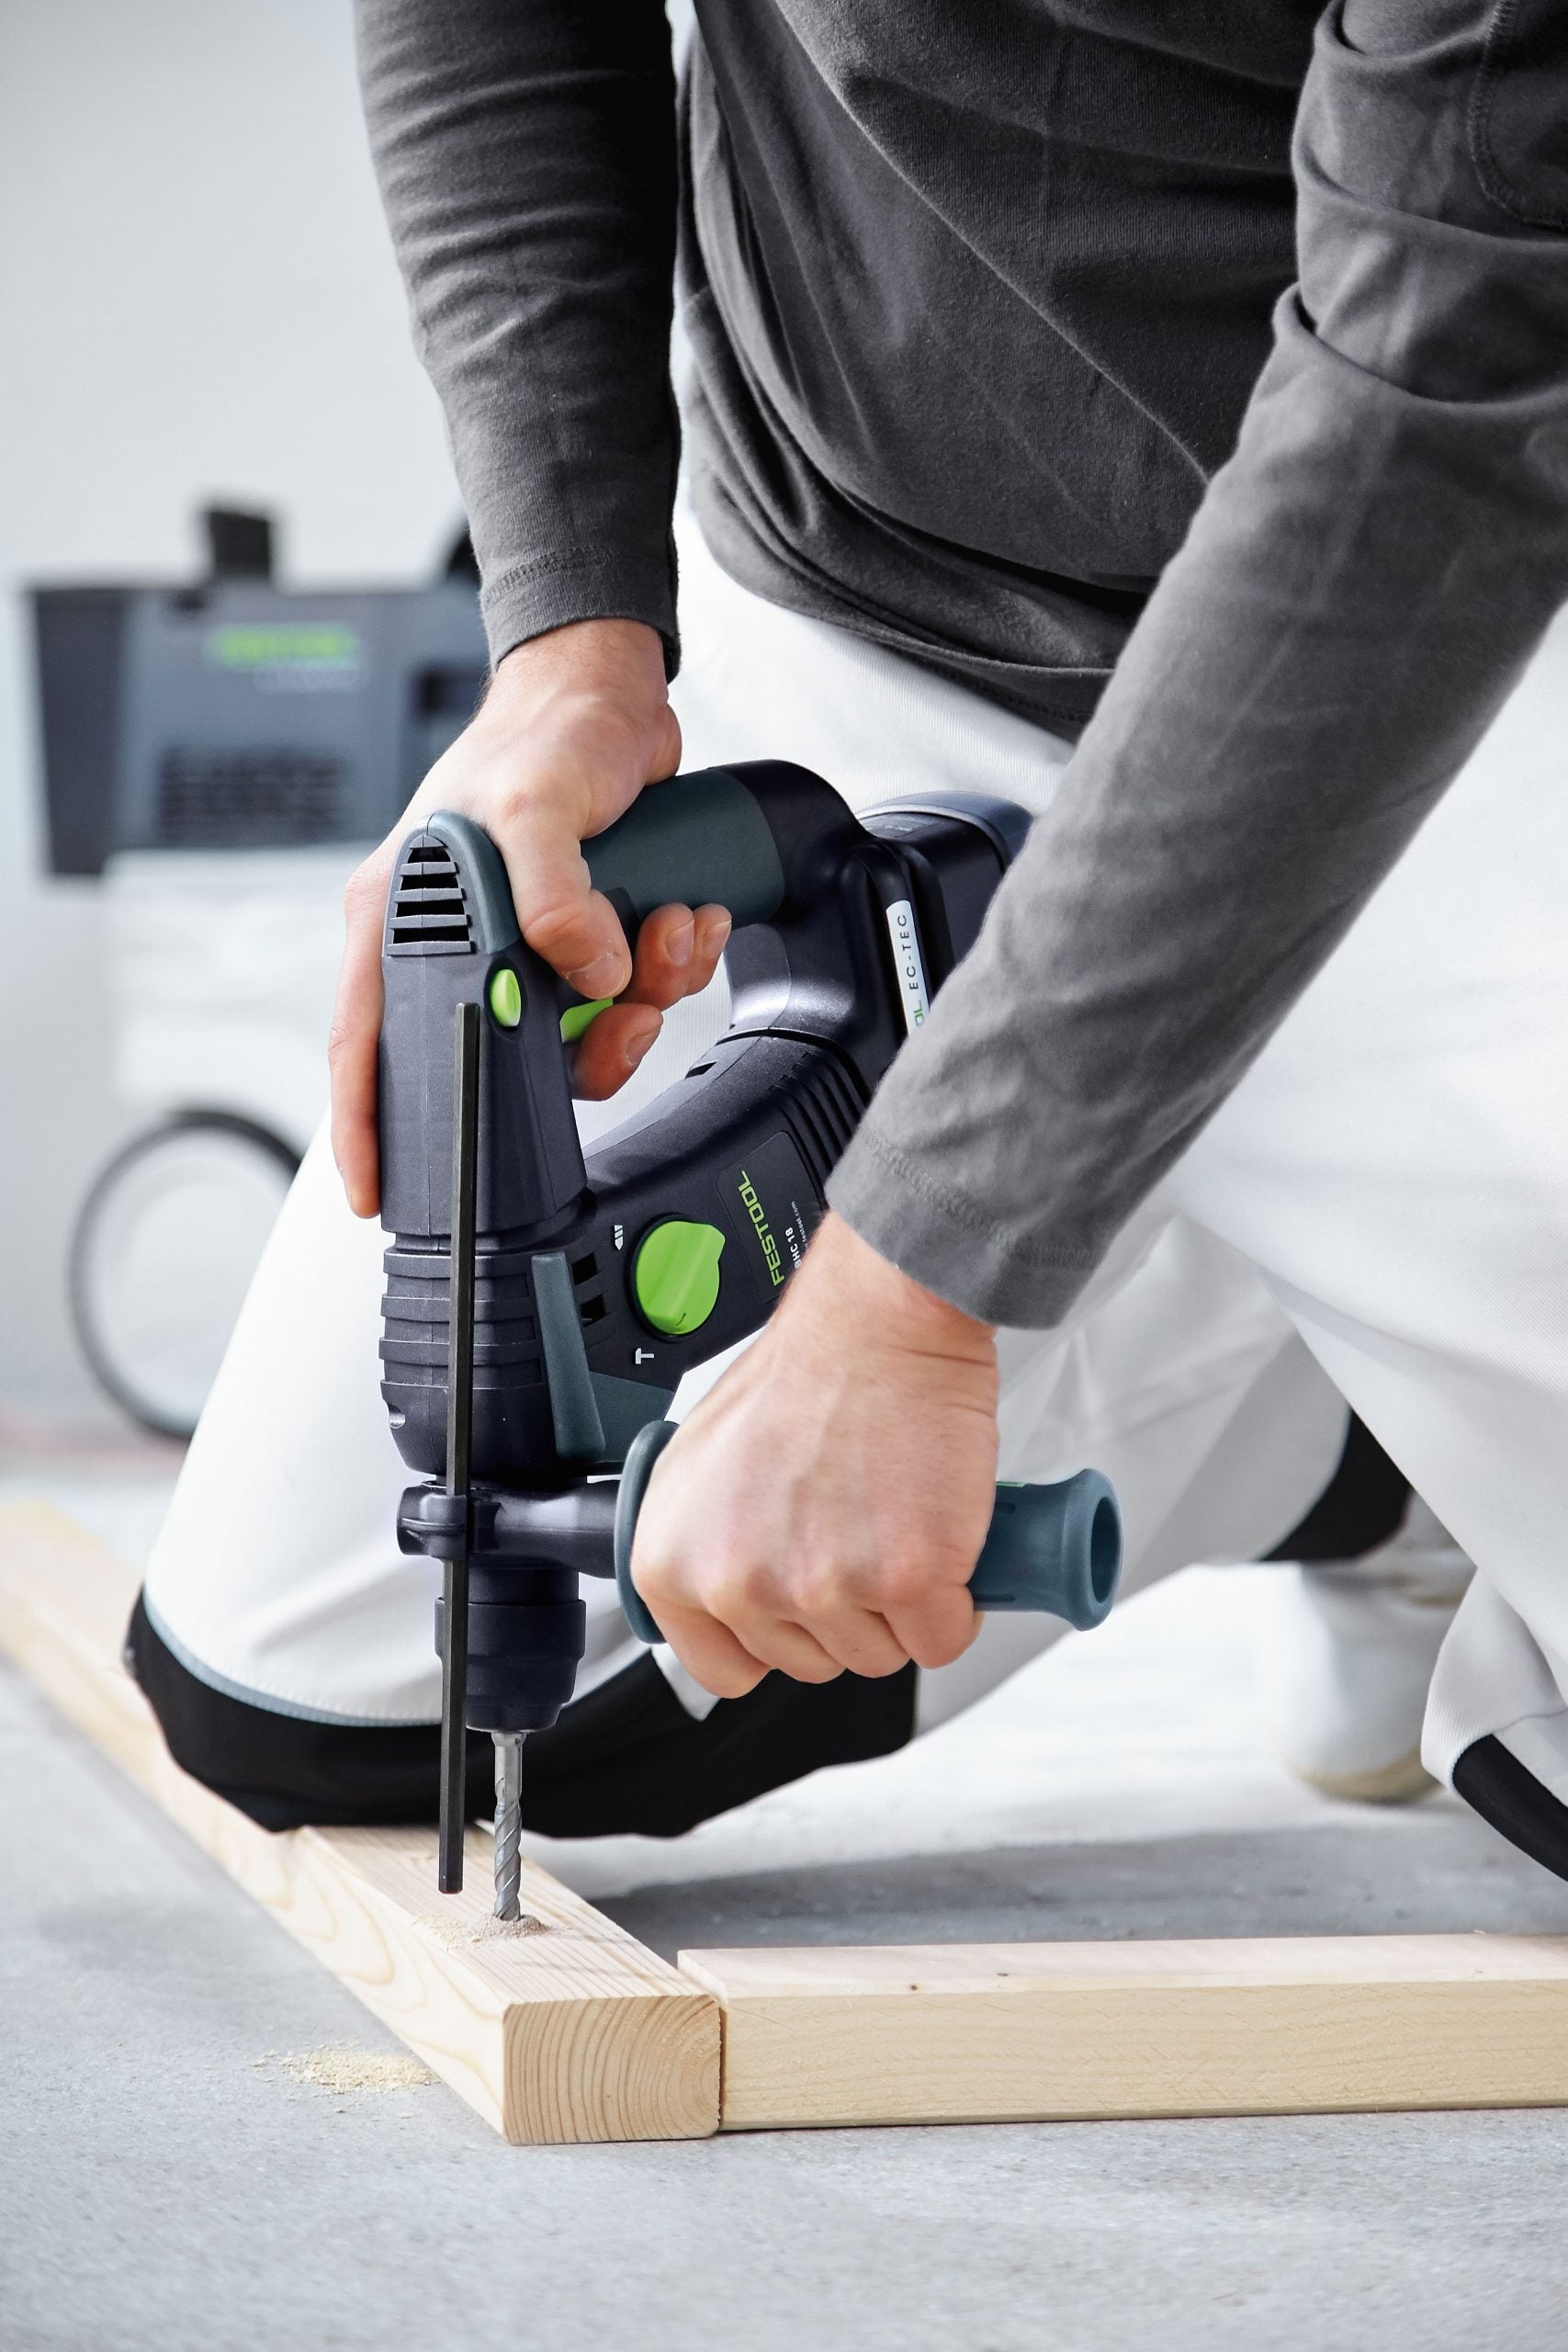 18V BHC 18 Cordless Rotary Hammer Basic in Systainer 576511 by Festool